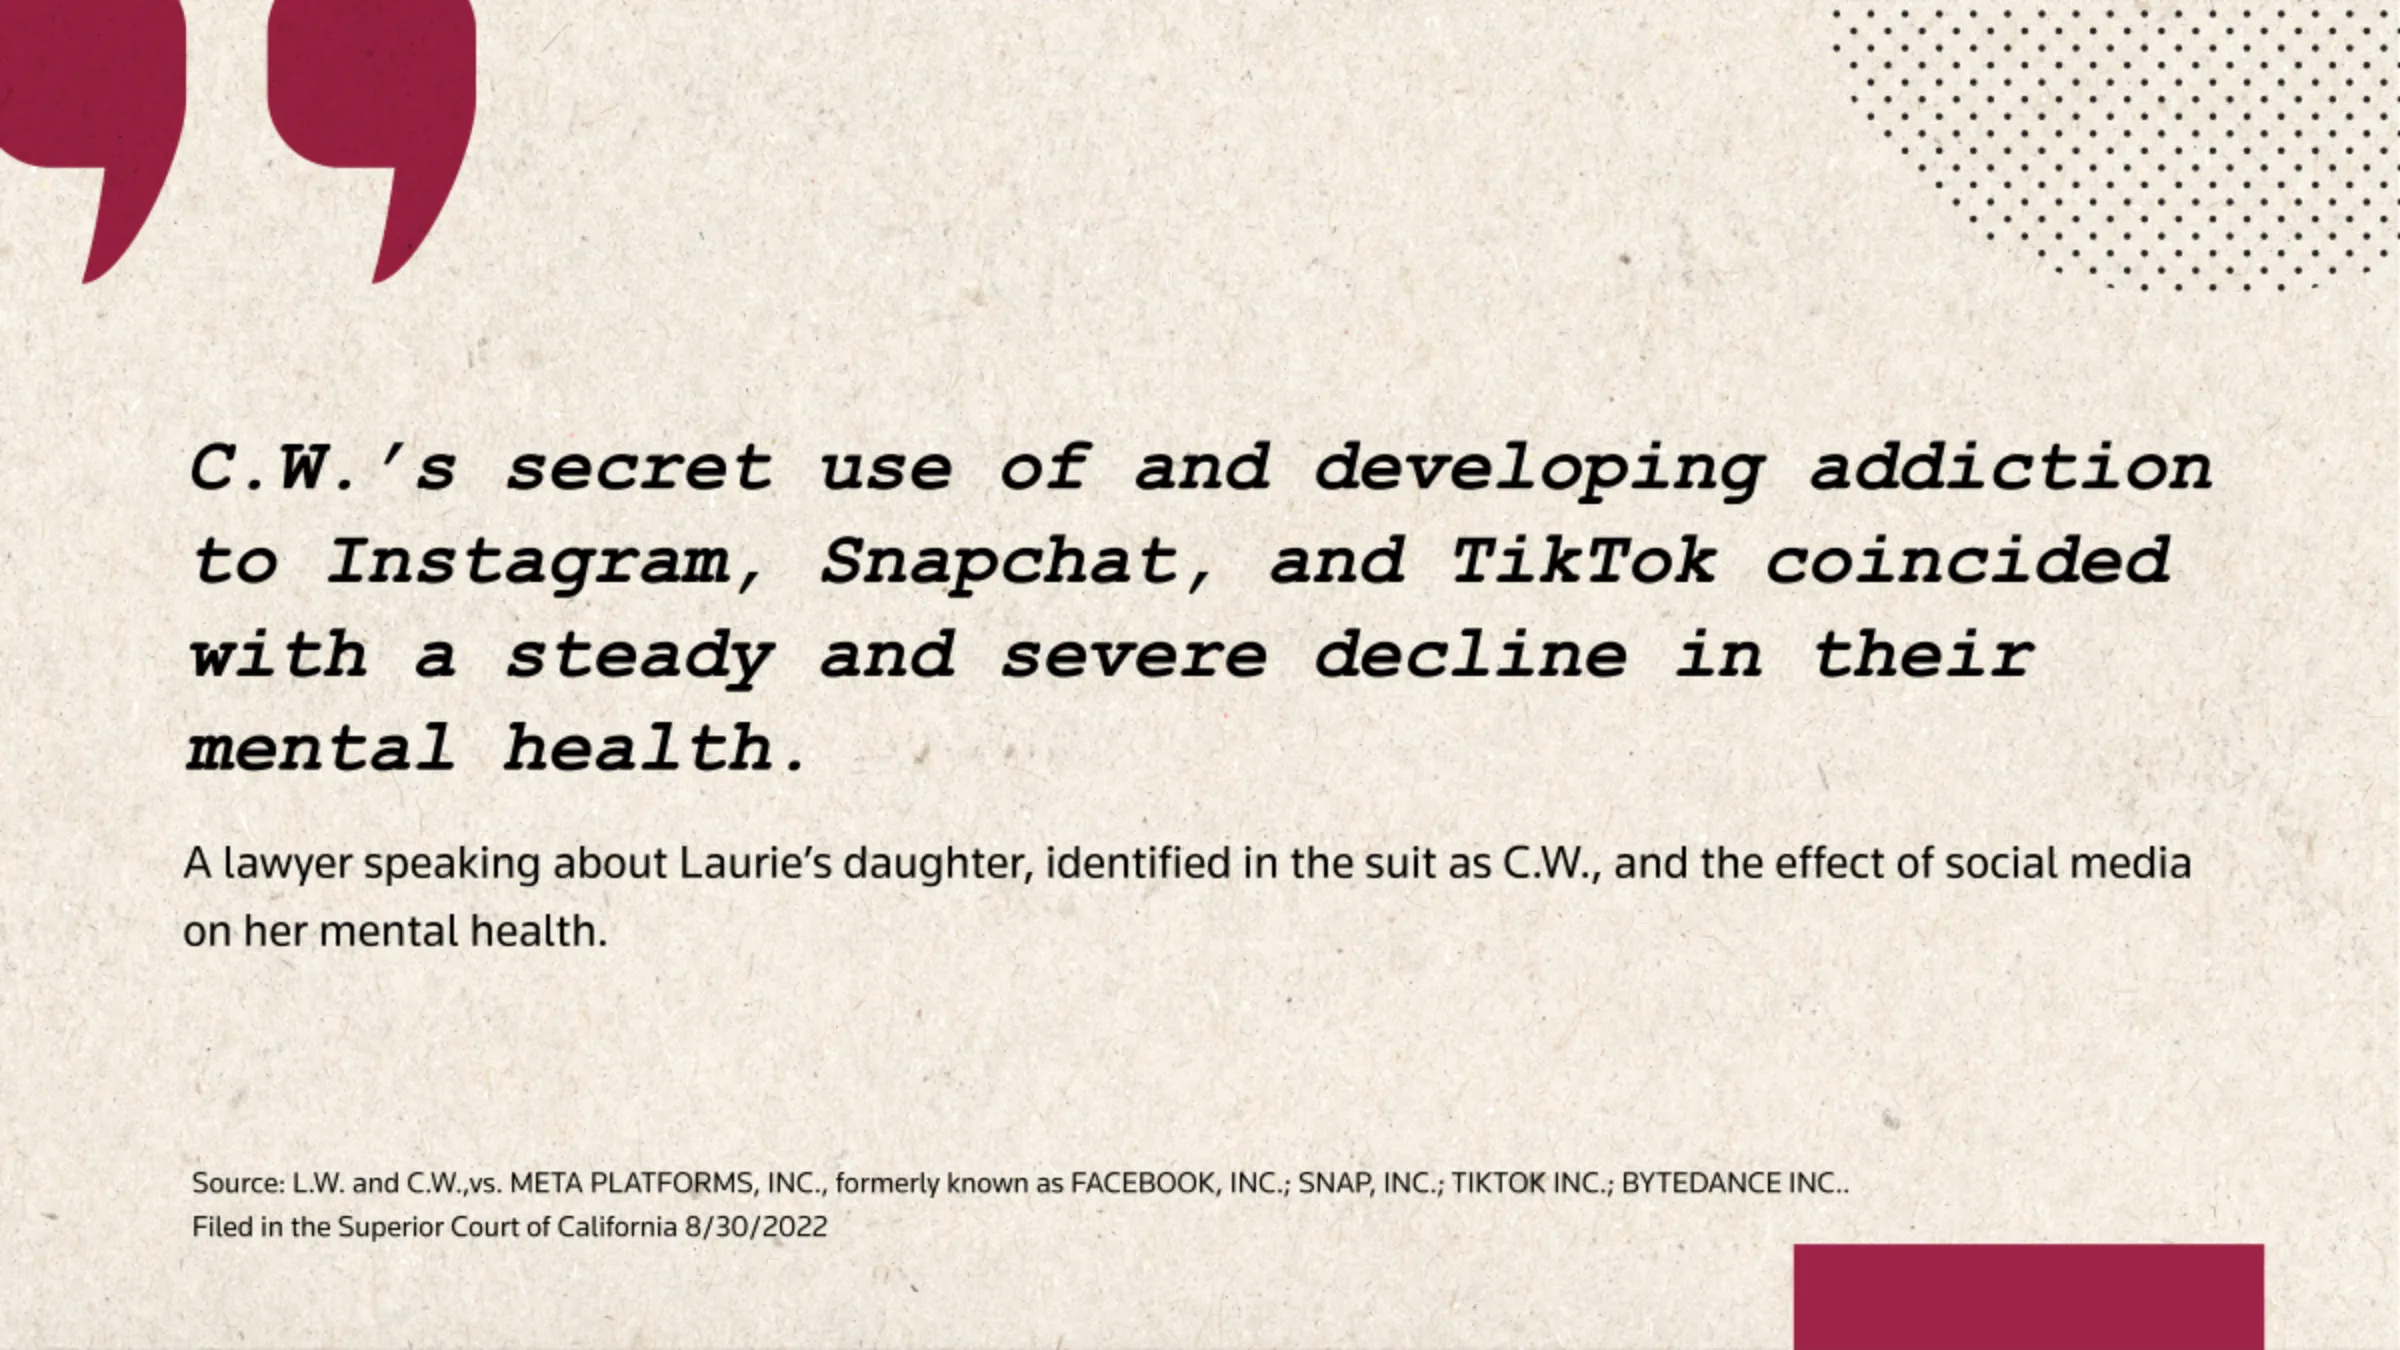 A quote card reads: 'C.W.'s secret use of and developing addiction to Instagram, Snapchat, and TikTok coincided with a steady and severe decline in their mental health.'
- A lawyer speaking about Laurie's daughter, identified in the suit as C.W., and the effect of social media on her mental health.
L.W. and C.W.,vs. META PLATFORMS, INC., formerly known as FACEBOOK, INC.; SNAP, INC.; TIKTOK INC.; BYTEDANCE INC.